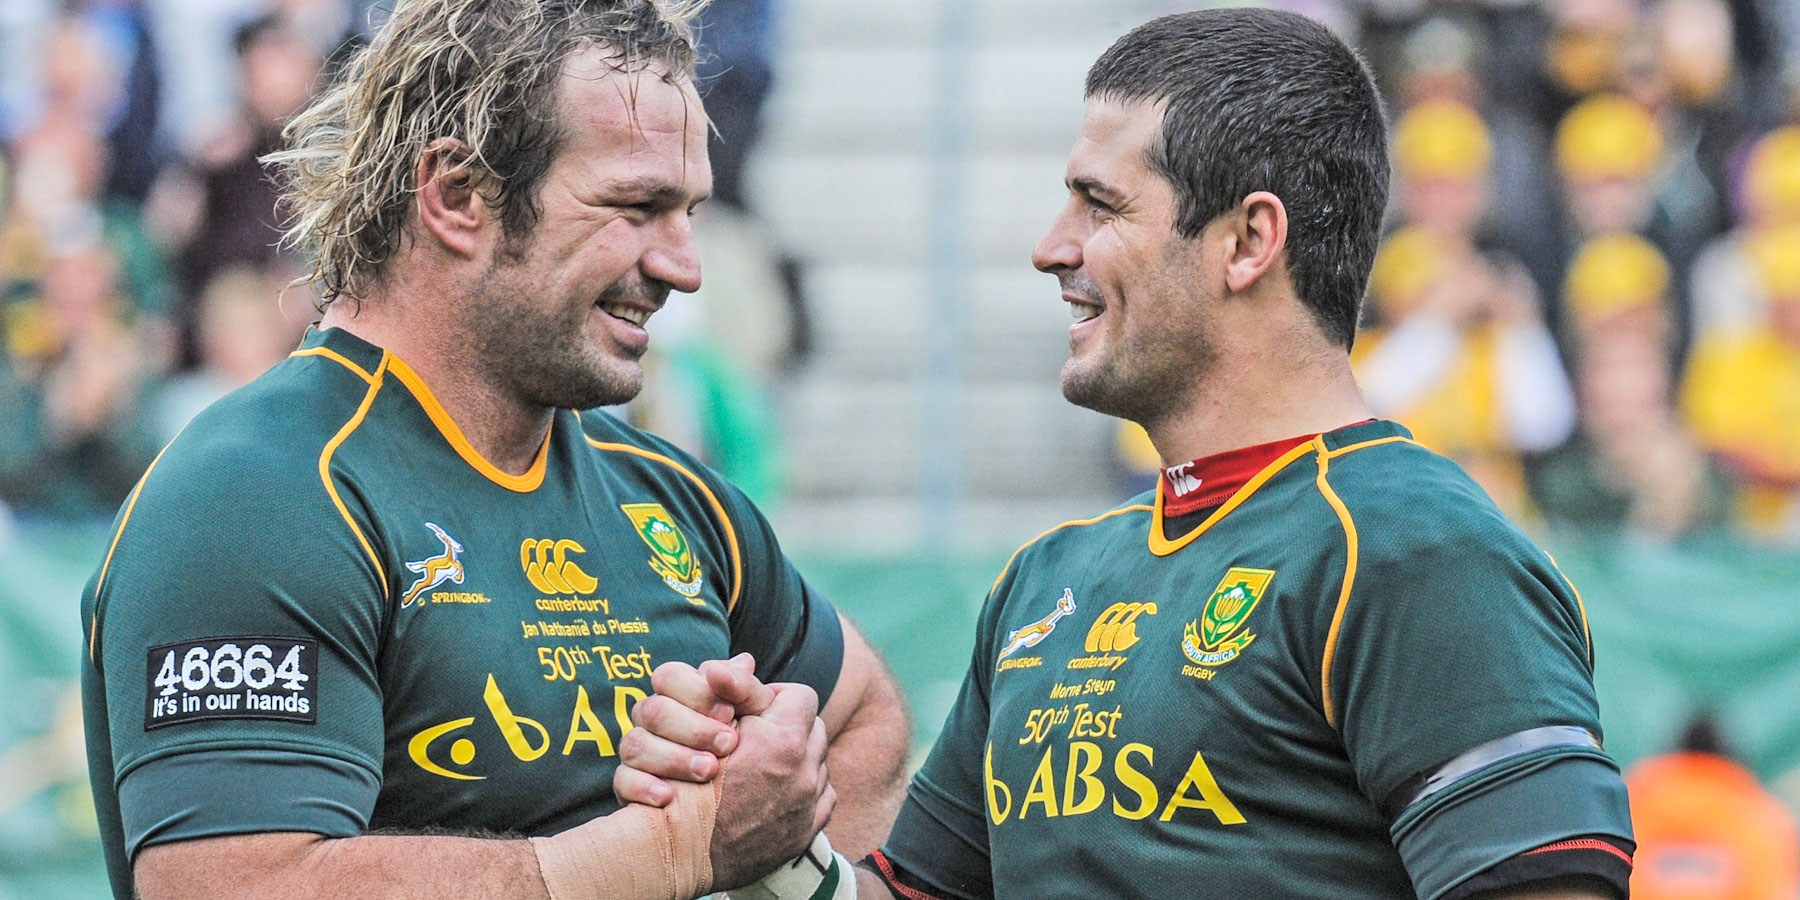 Steyn reached his 50th Test cap with Jannie du Plessis against the Wallabies in Cape Town in 2013.